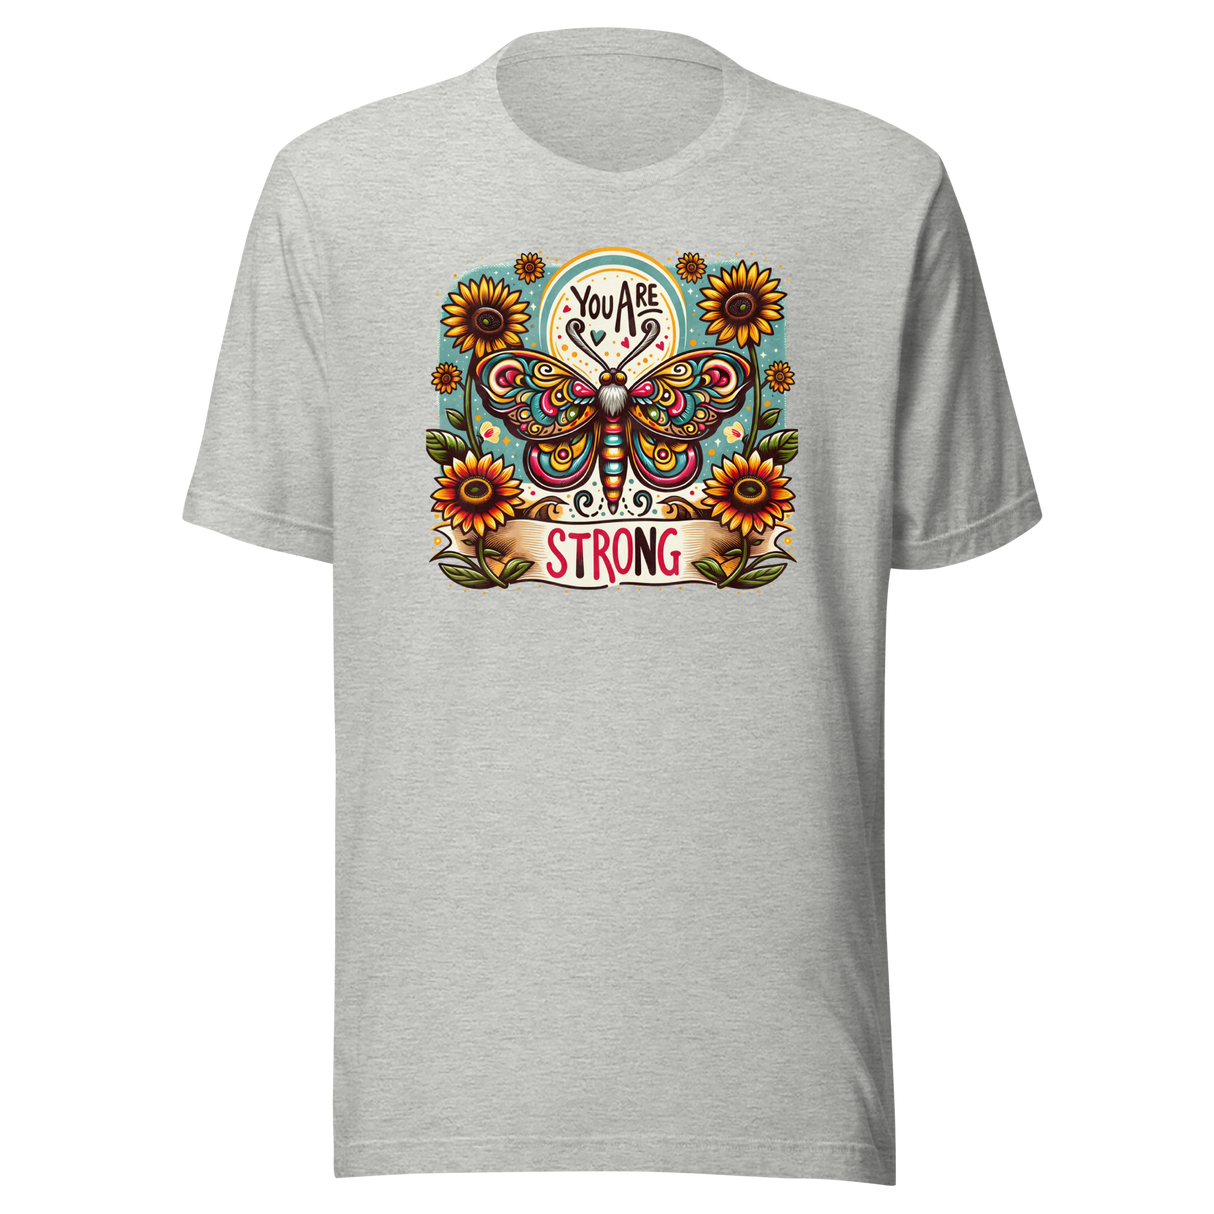 you-are-strong-bohemian-hippie-style-with-butterfly-boho-tee-inspirational-t-shirt-bohemian-tee-hippie-t-shirt-style-tee#color_athletic-heather